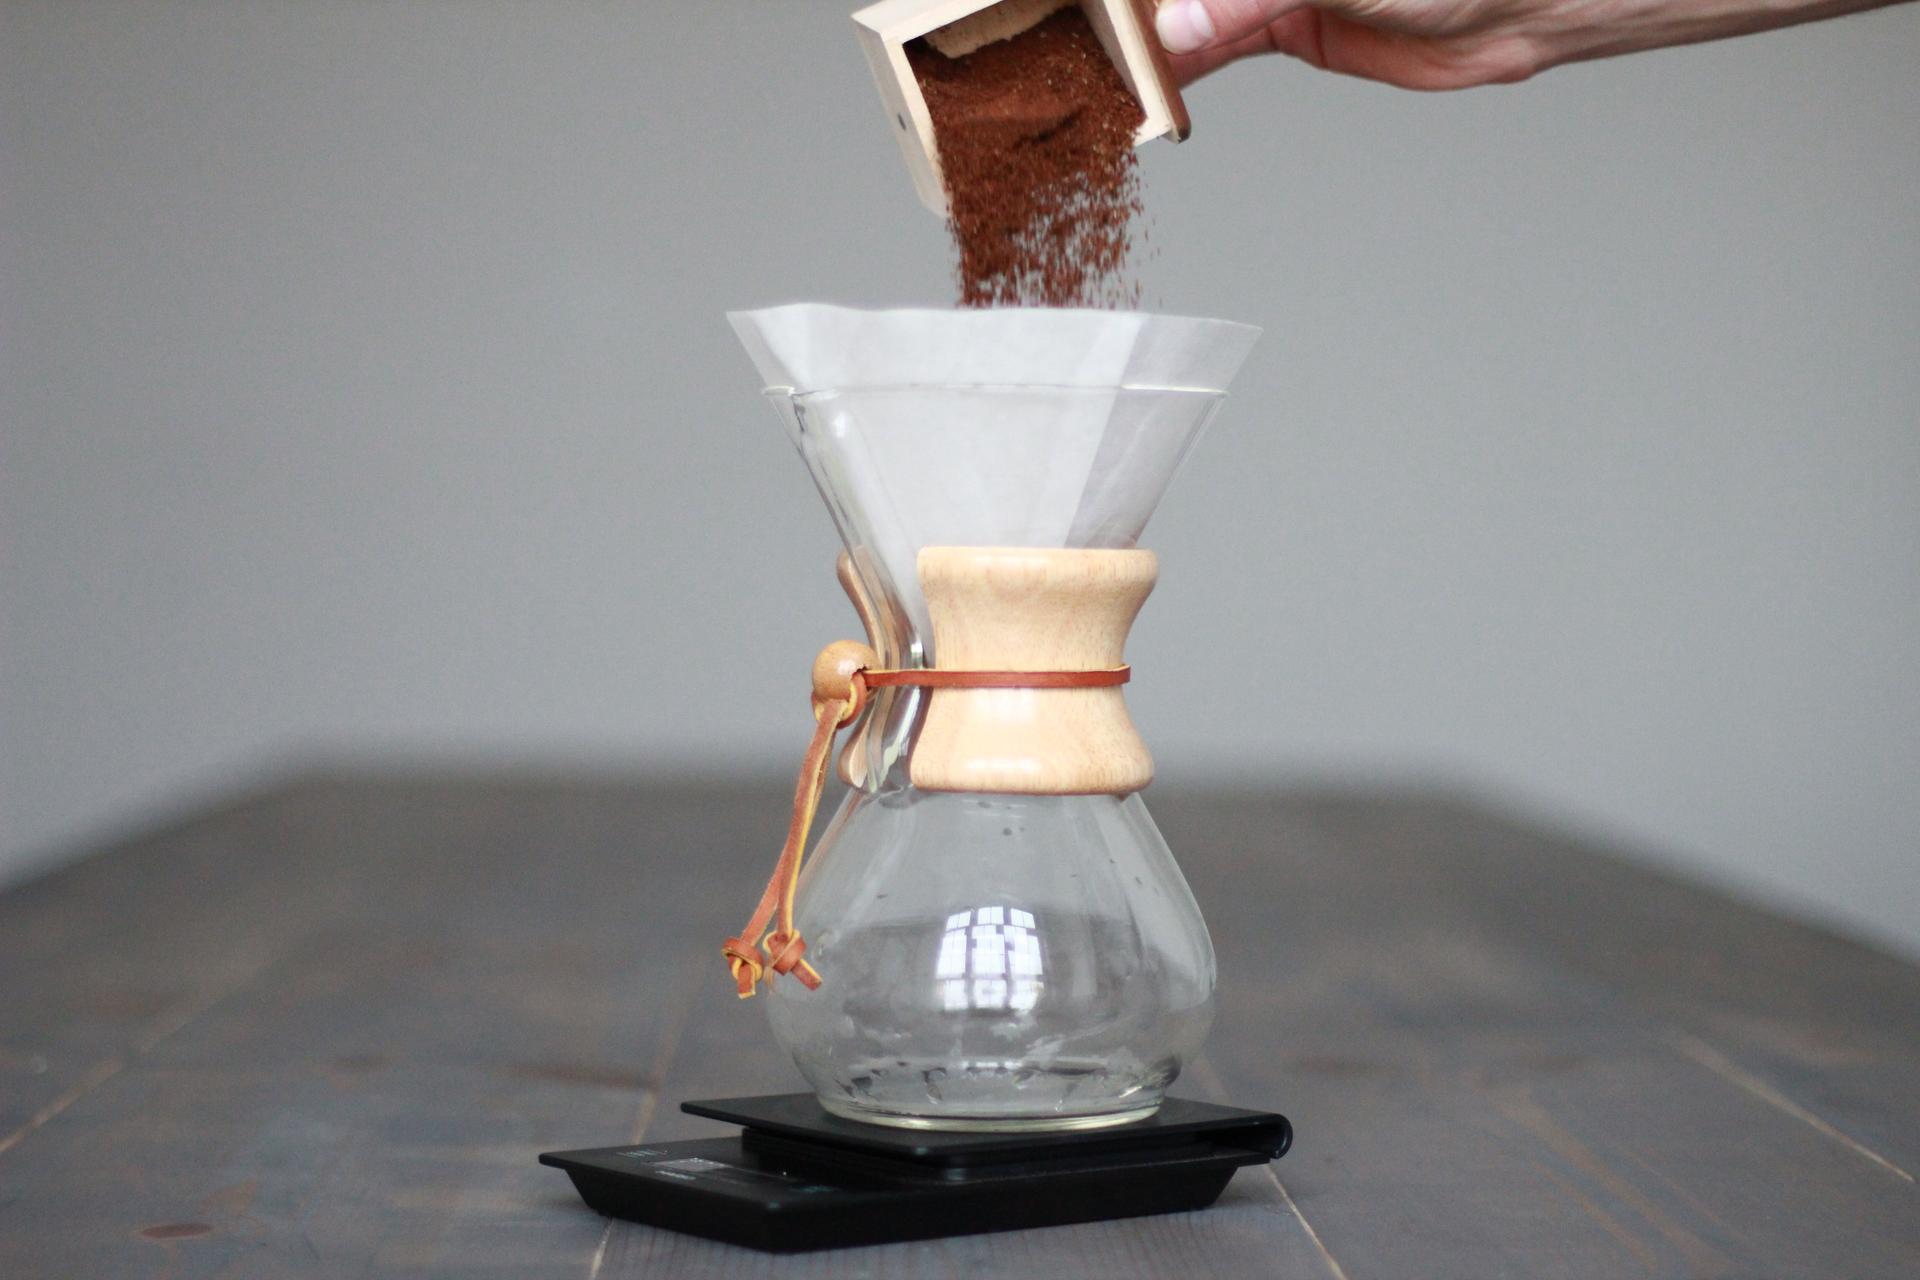 The Chemex brewer, made in Chicopee, Mass., is a popular brewing device among coffee aficionados — and British spies.